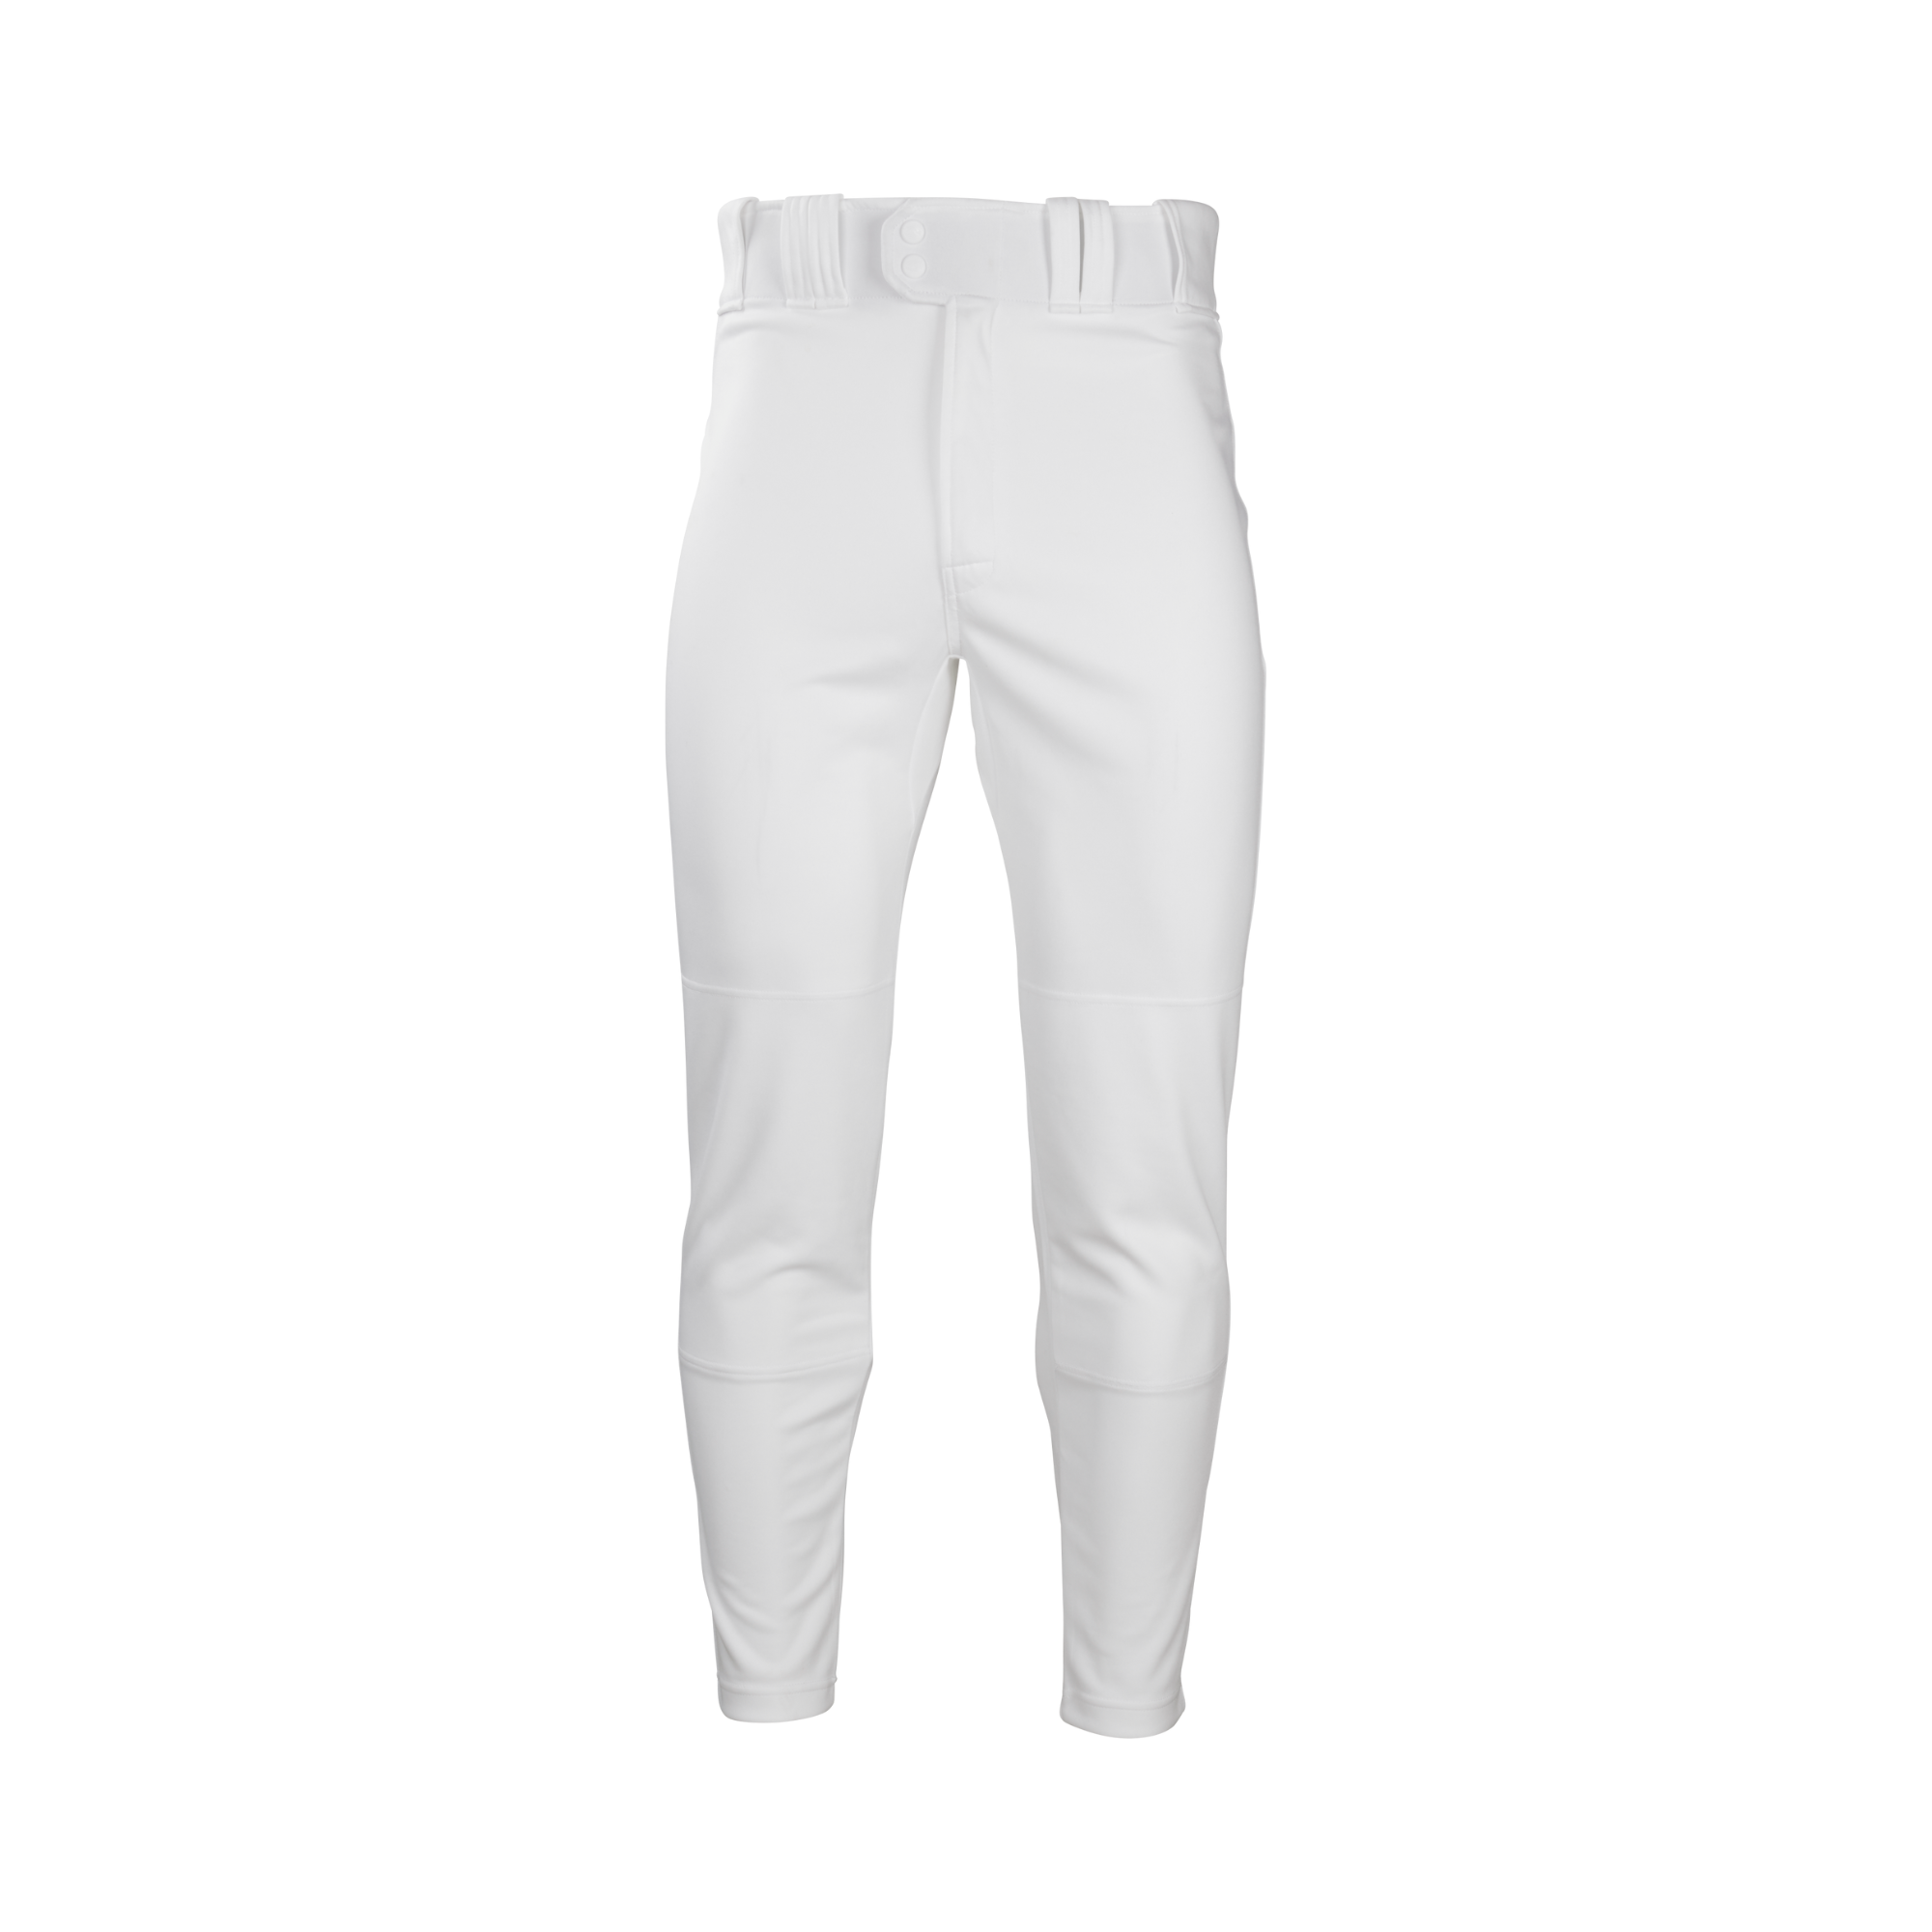 Rawlings Youth 150 Jogger Fit Pant - White